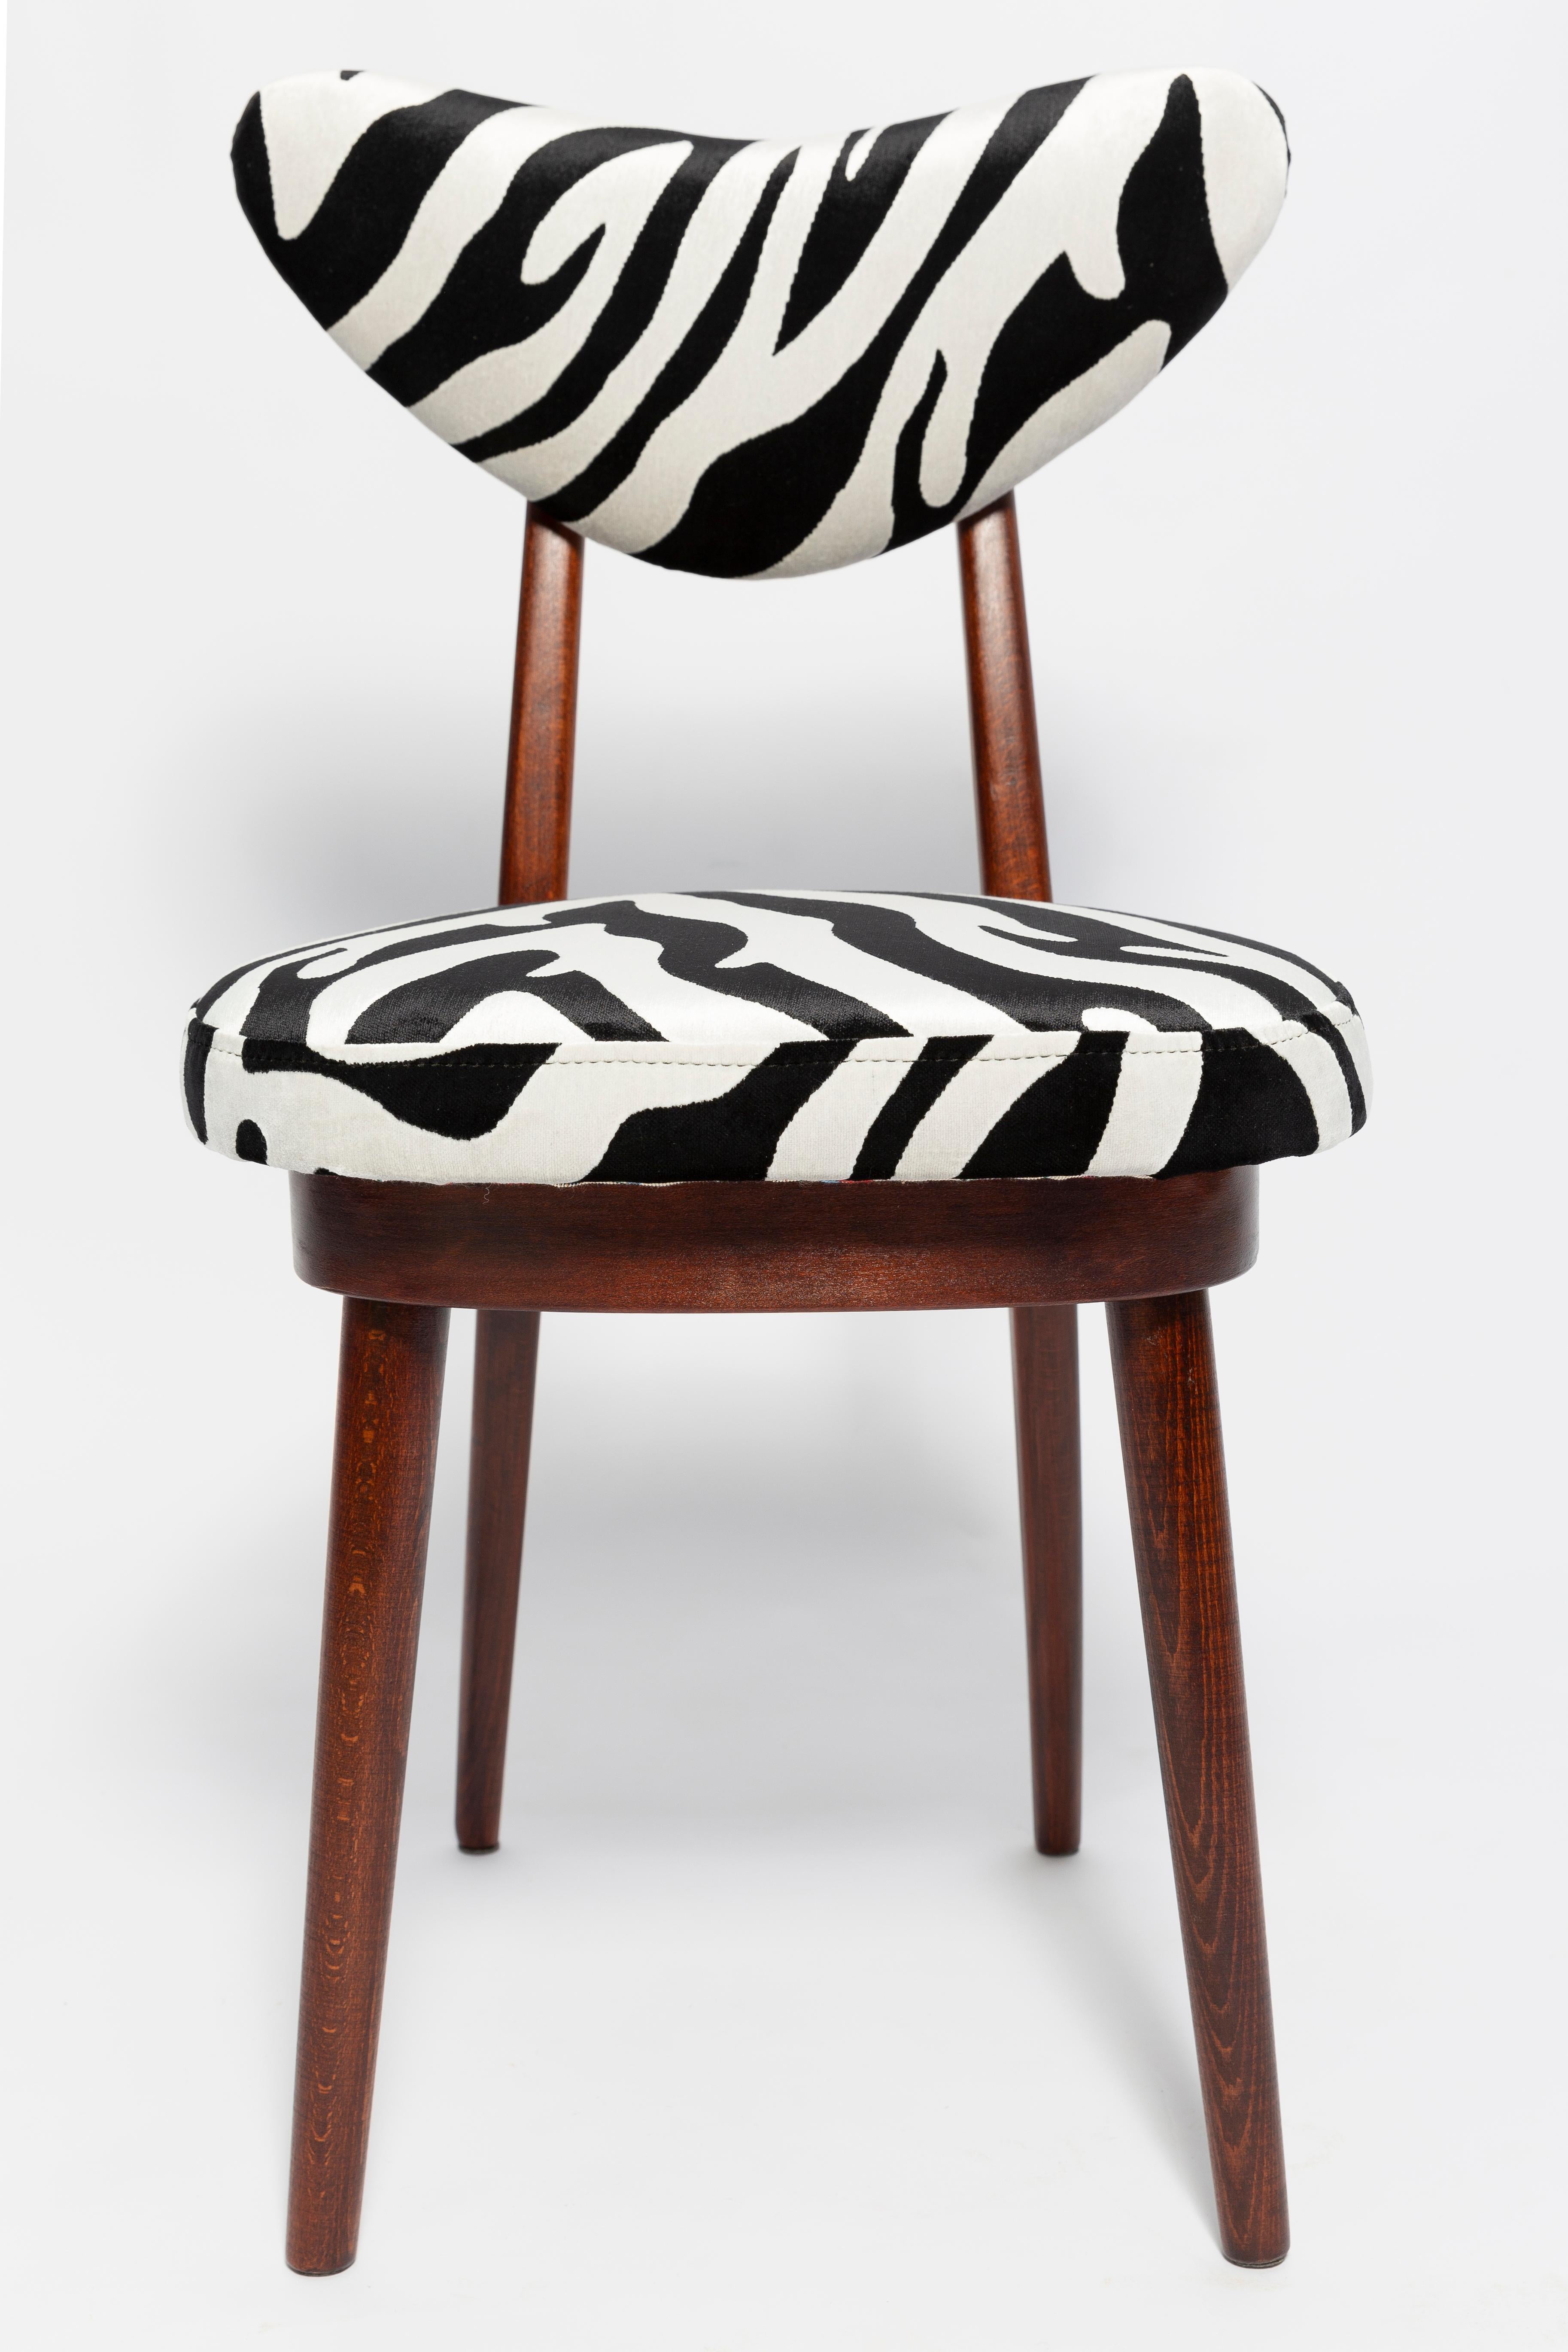 Set of Twelve Mid-Century Zebra Black and White Heart Chairs, Poland, 1960s For Sale 3